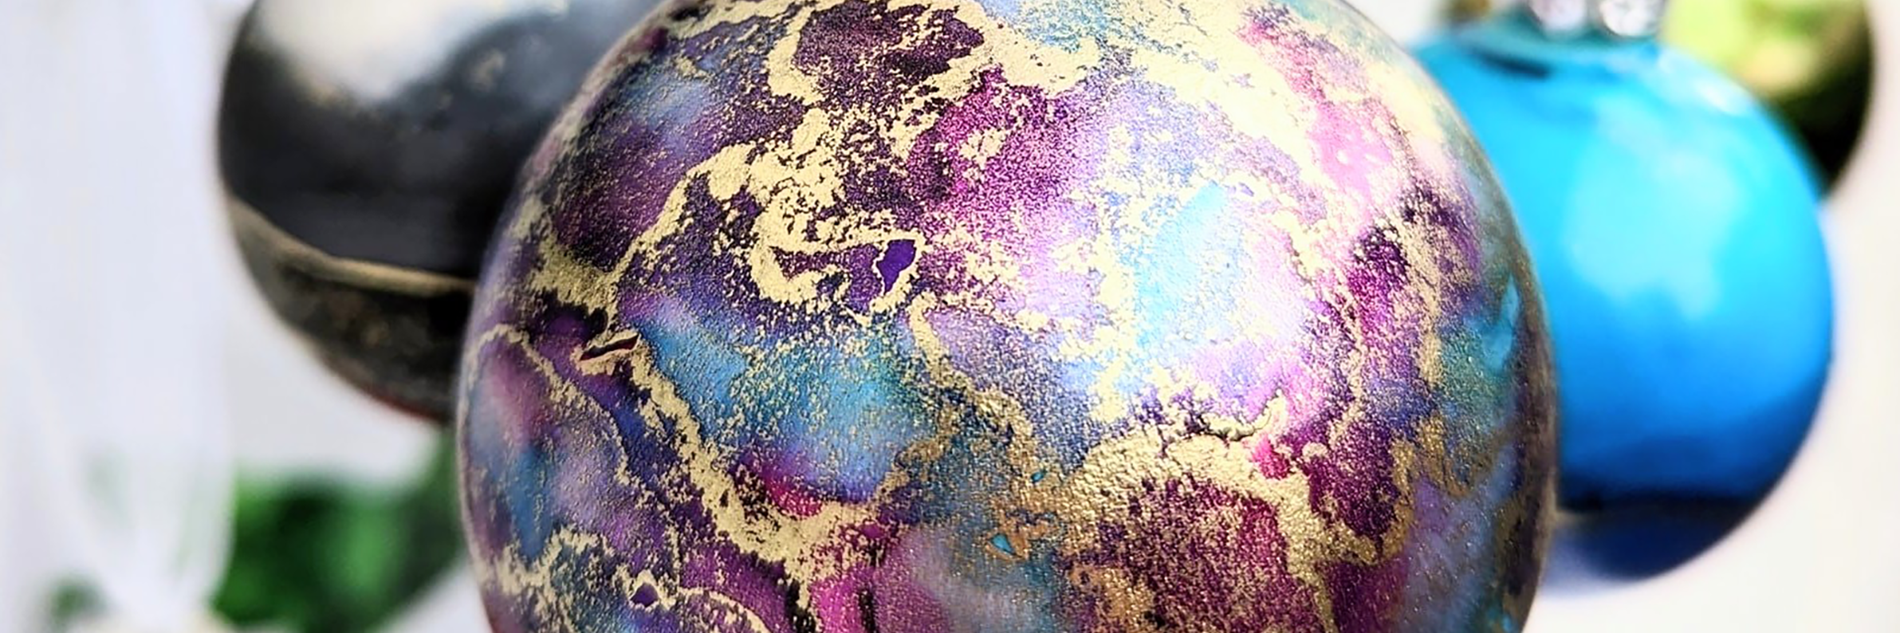 A close up of a purple bauble with swirls of gold and blue ink patterns. Other baubles can be seen in the background.